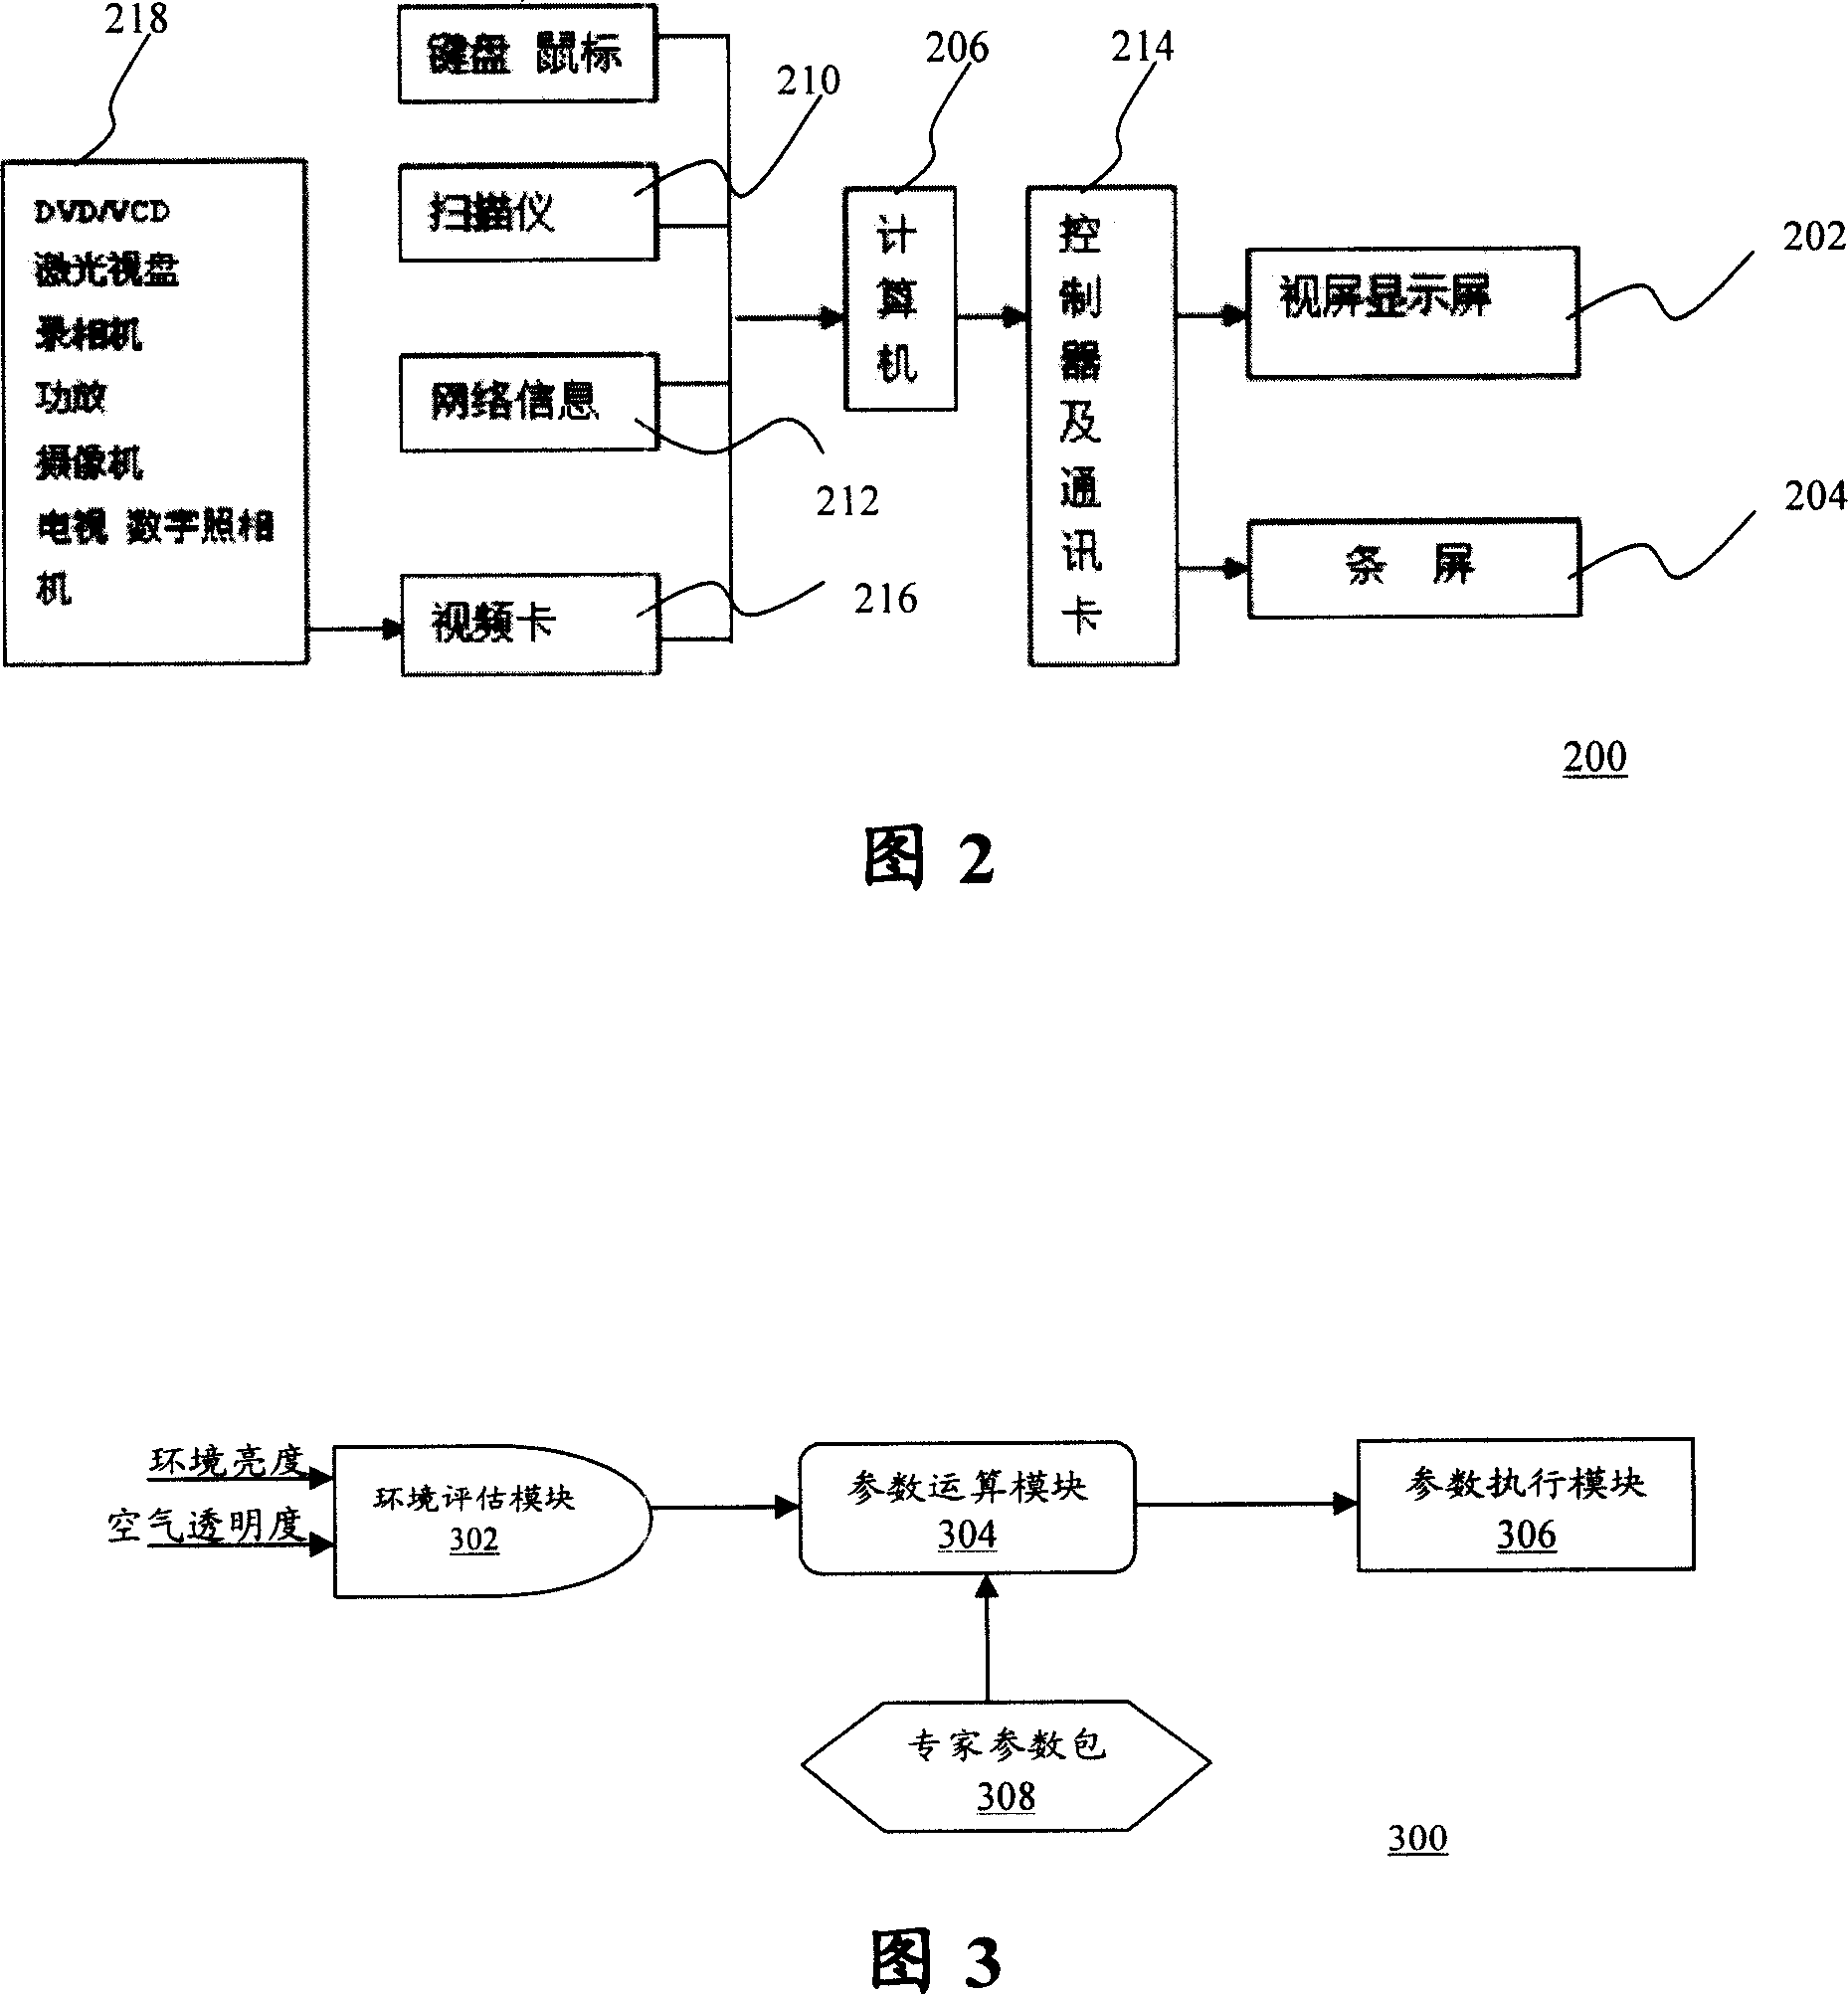 Display quality automatic regulation device and method based on environment induction